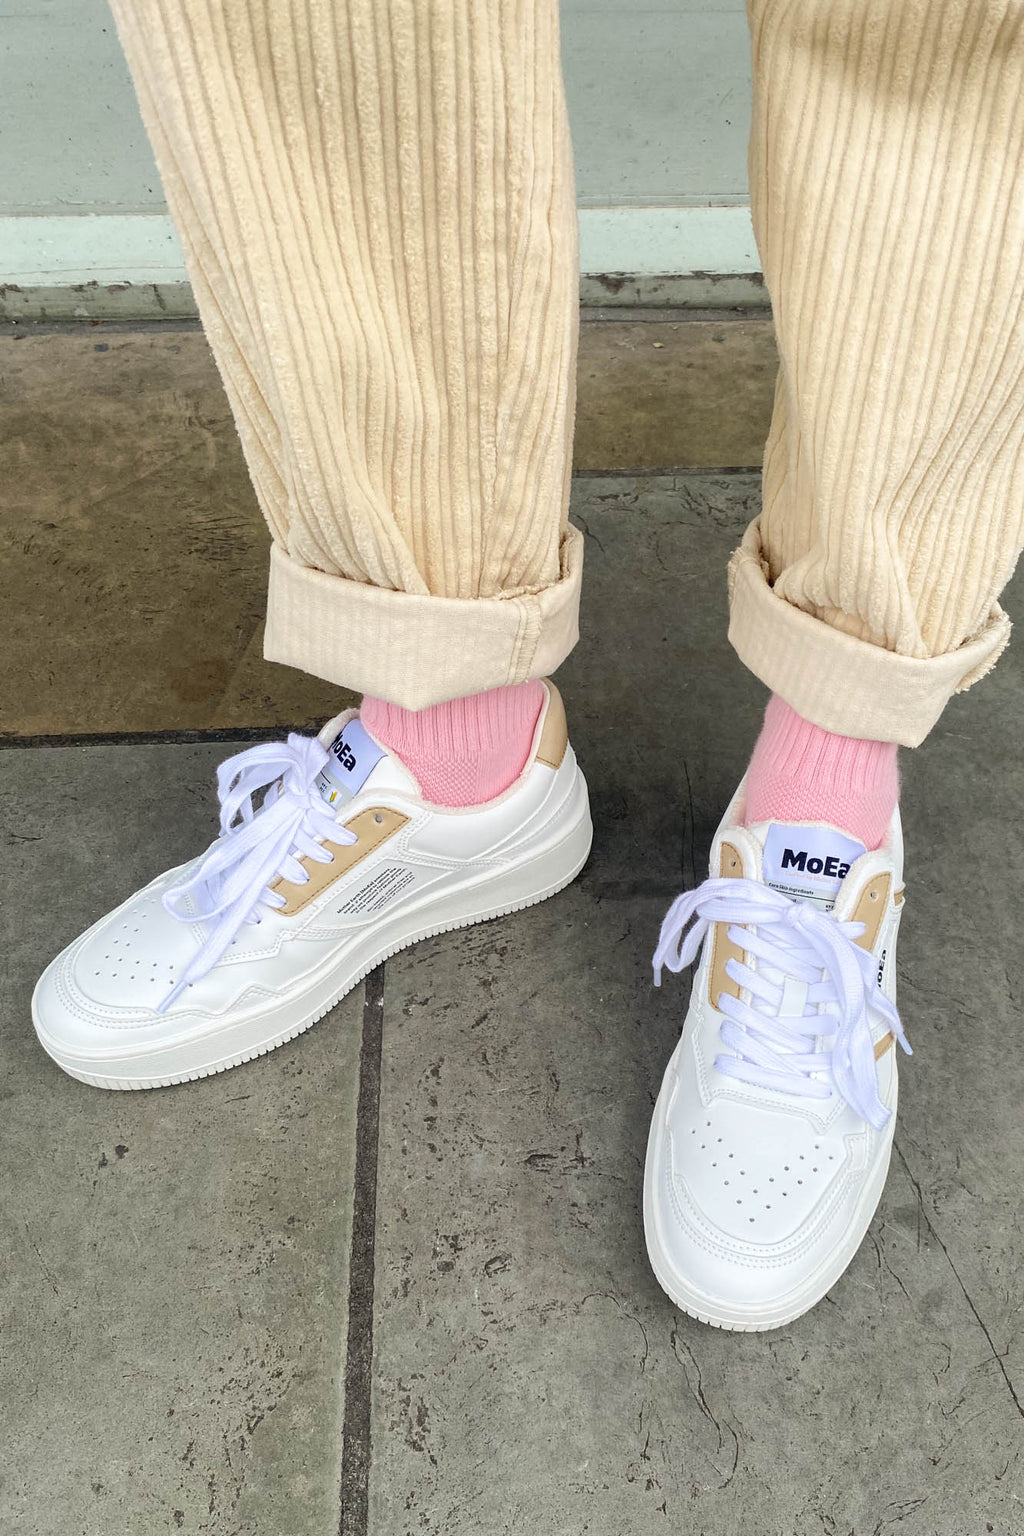 MoEa GEN1 - Corn White and Beige Sneakers - The Mercantile London